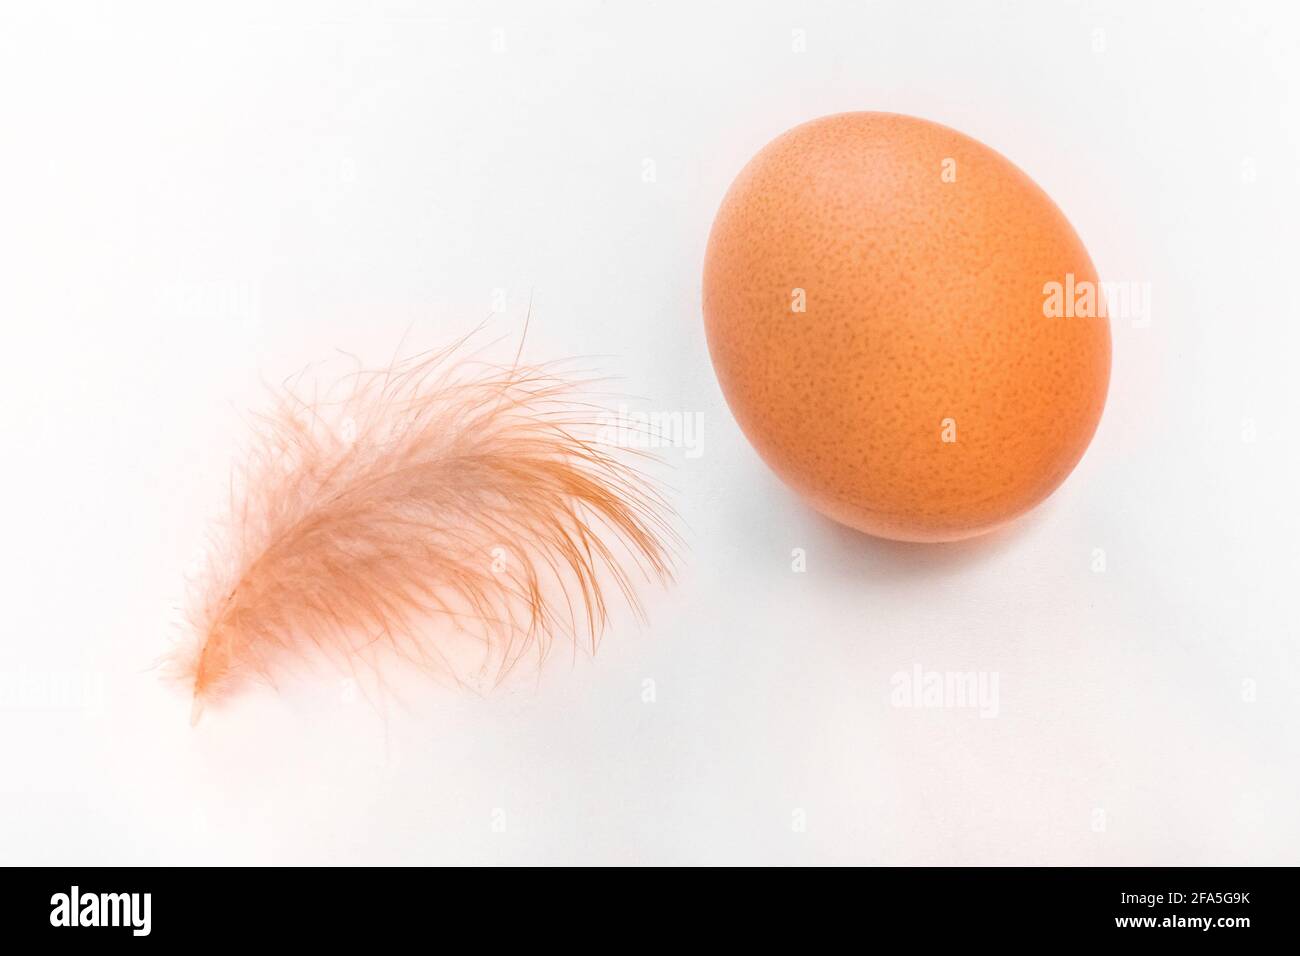 Brown chicken egg and small fluffy feather of chicken on white background, isolated. Stock Photo